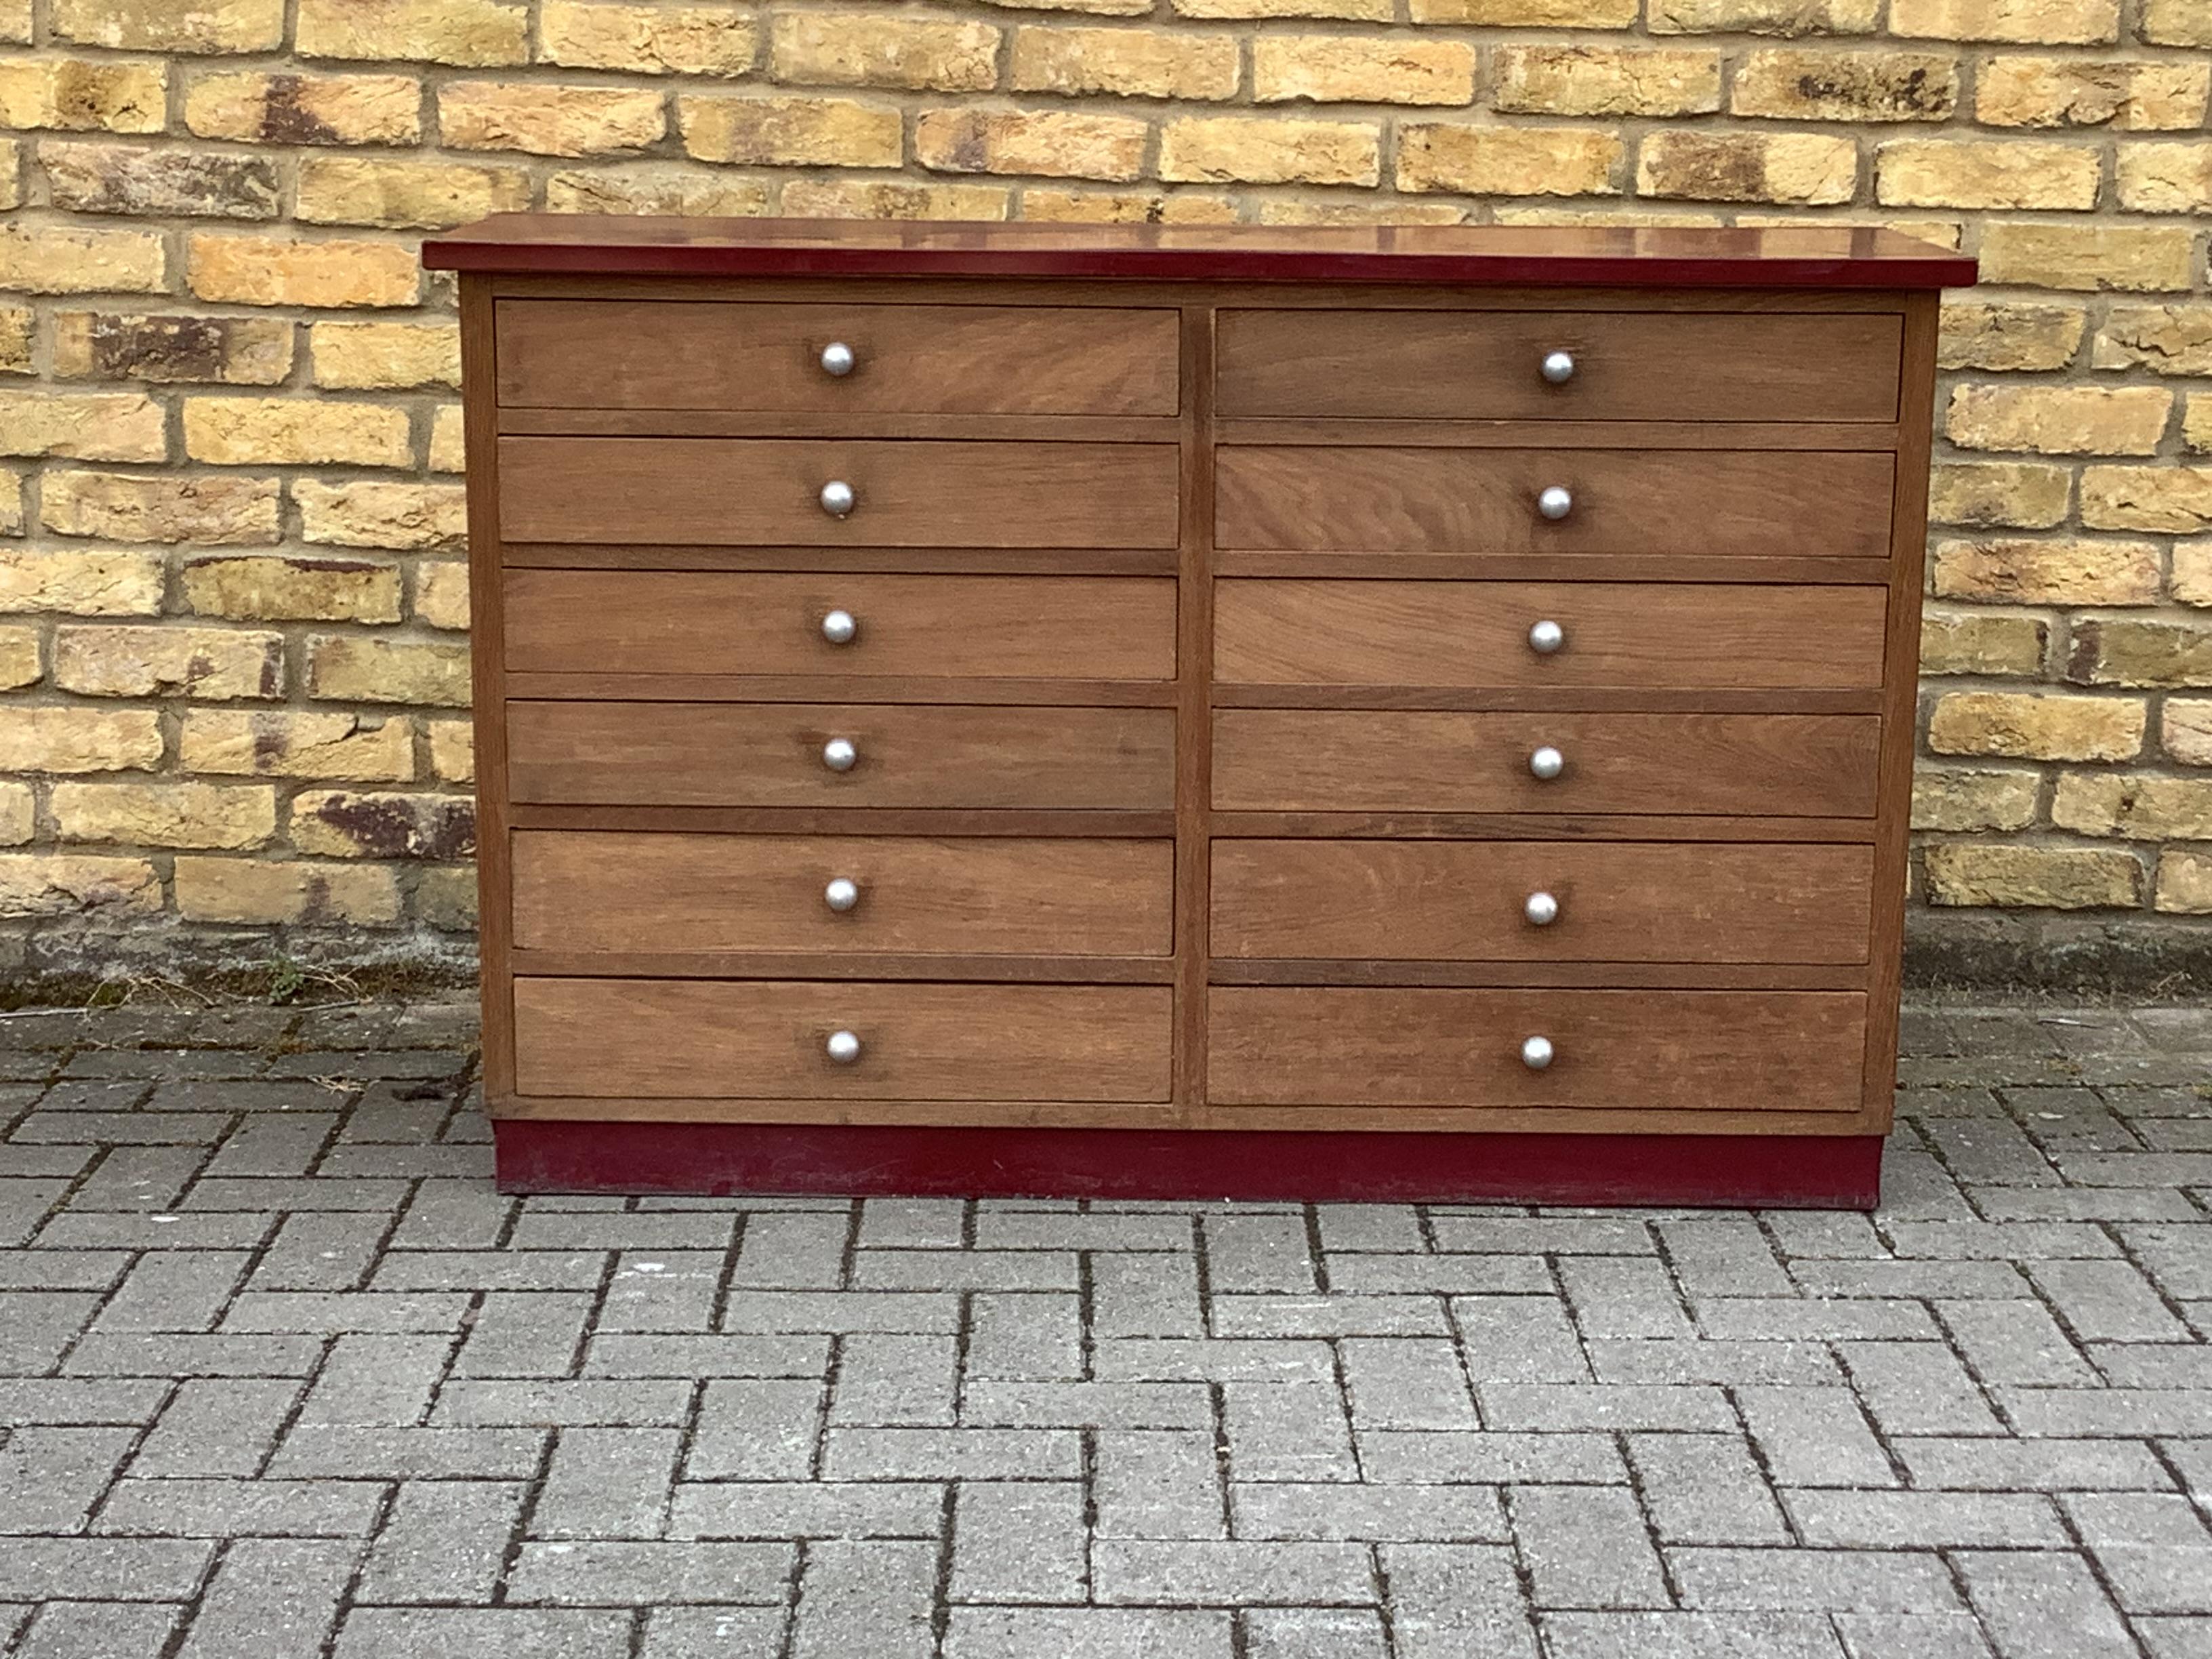 12 draw industrial storage cabinet in oak with a red Formica 
Top